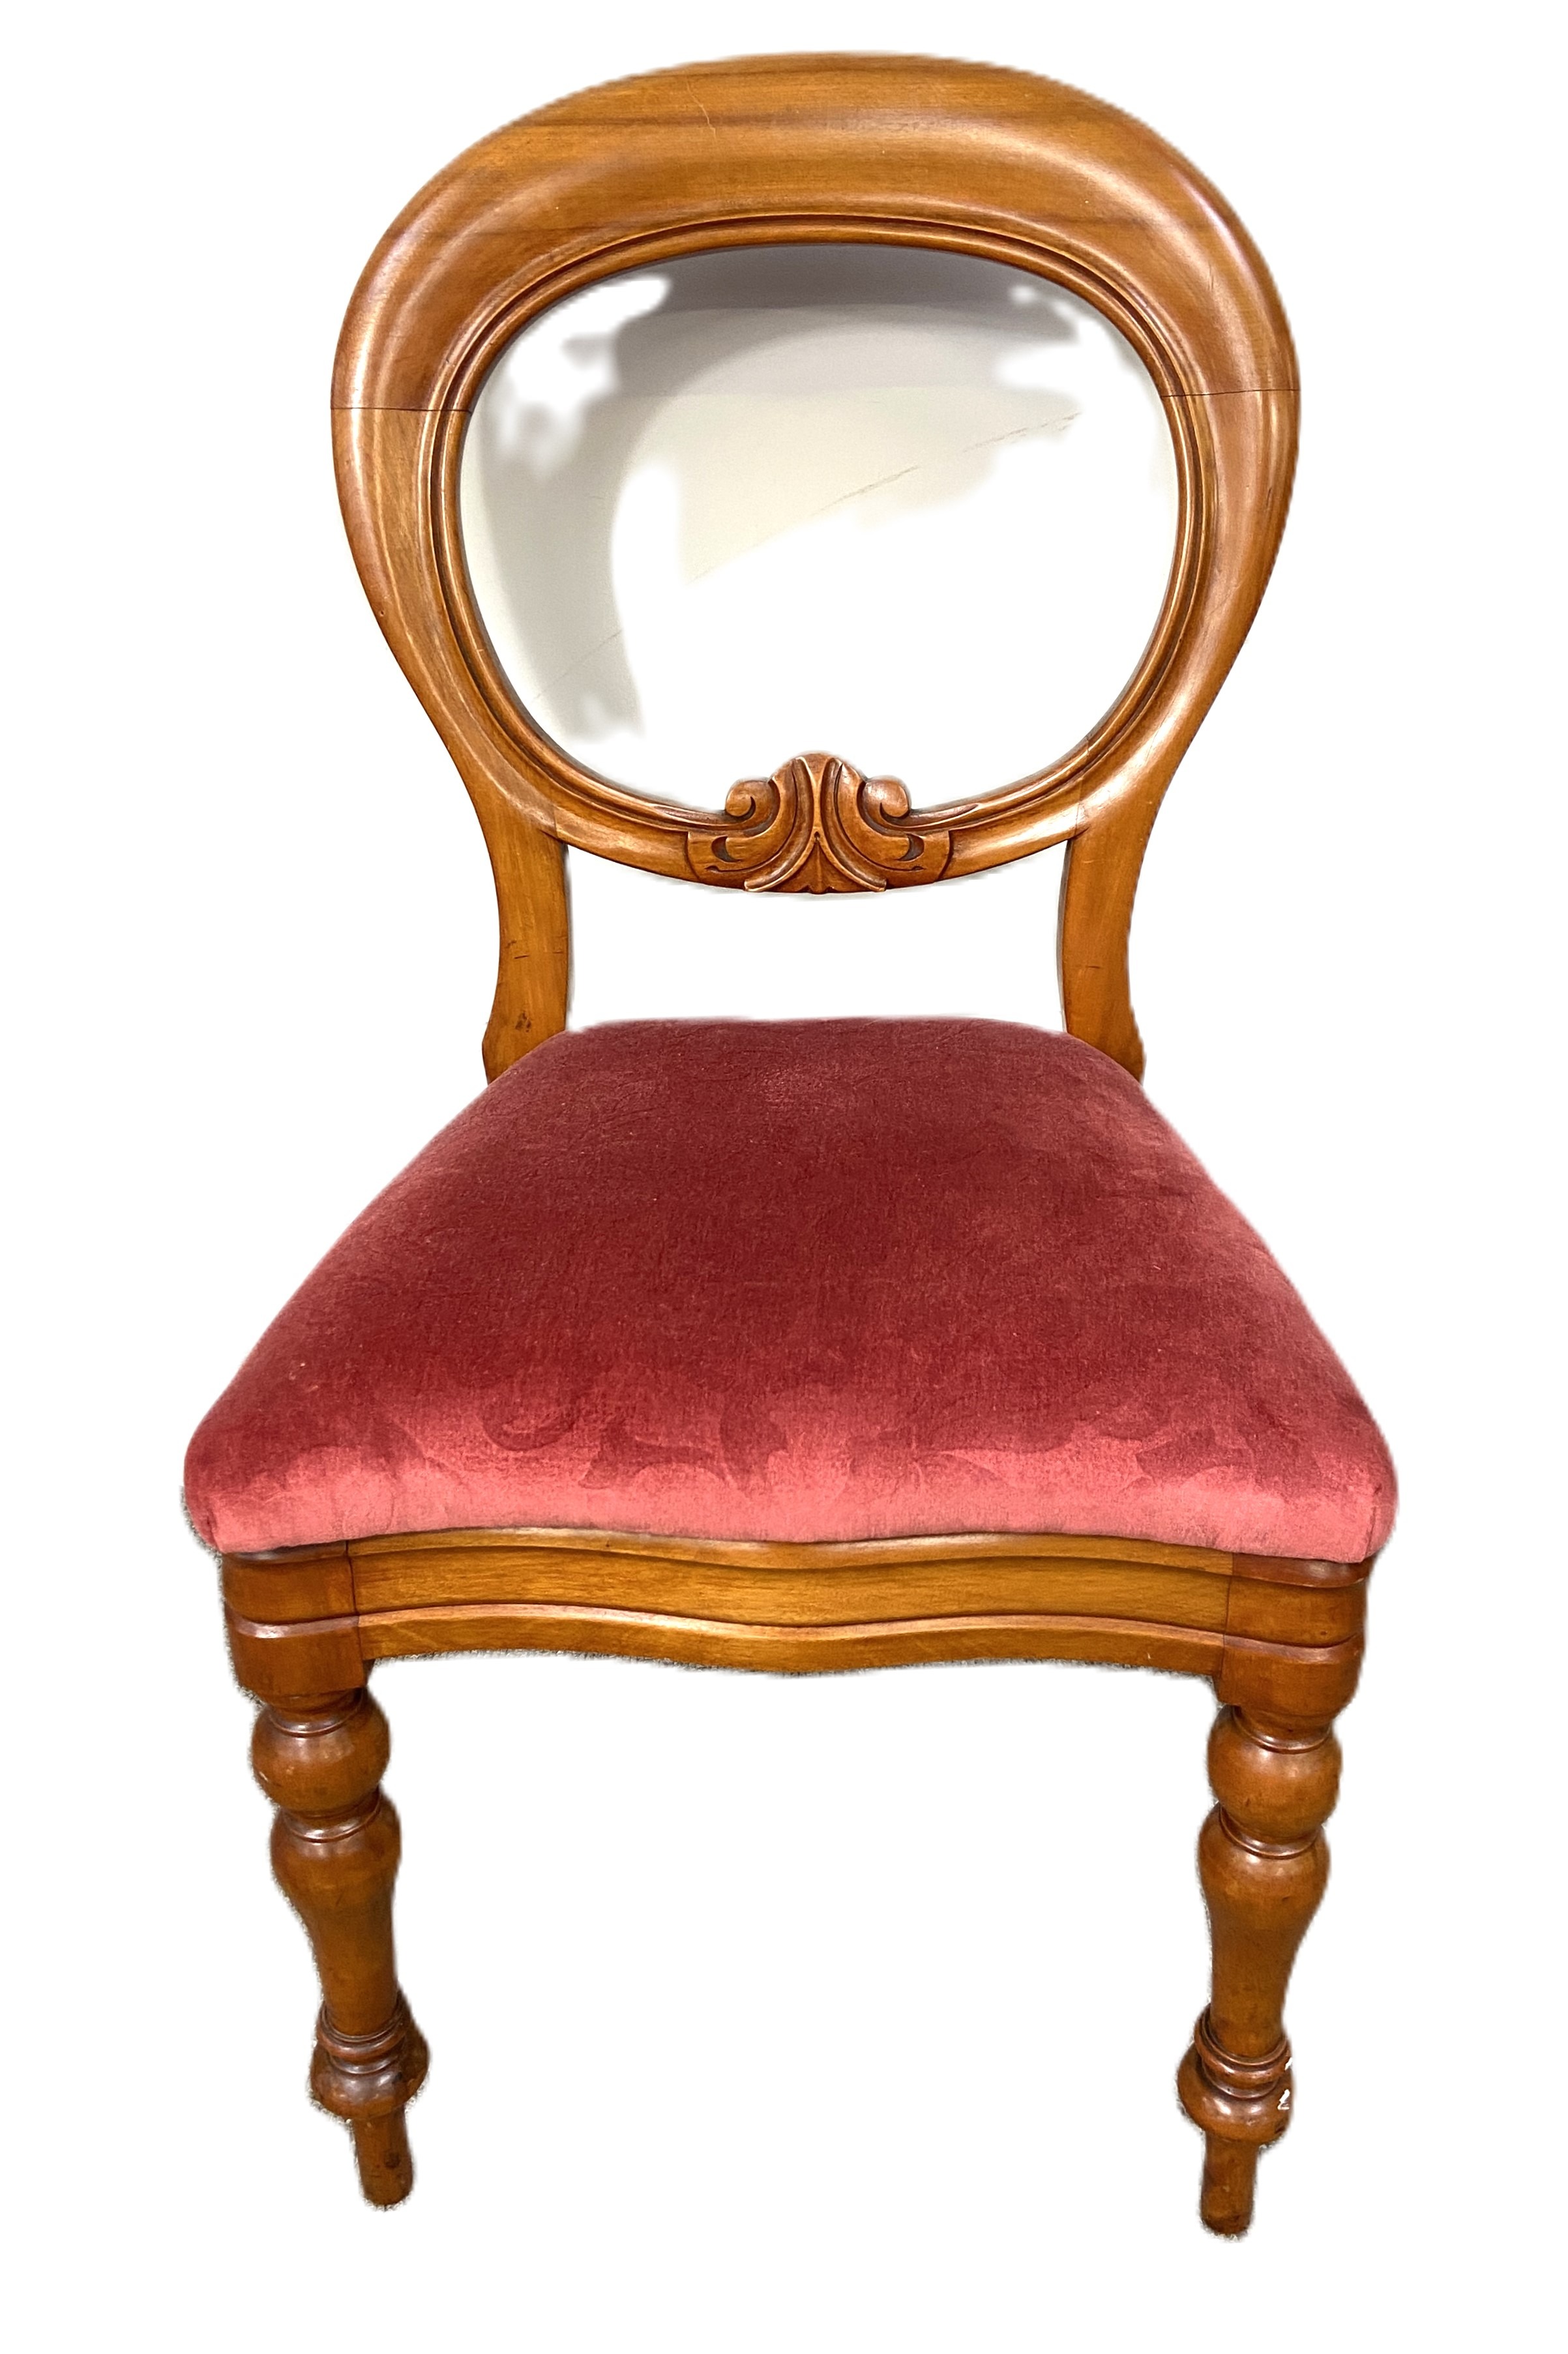 A set of Victorian style balloon backed dining chairs, each with a stuffed seat squab, currently - Image 3 of 5